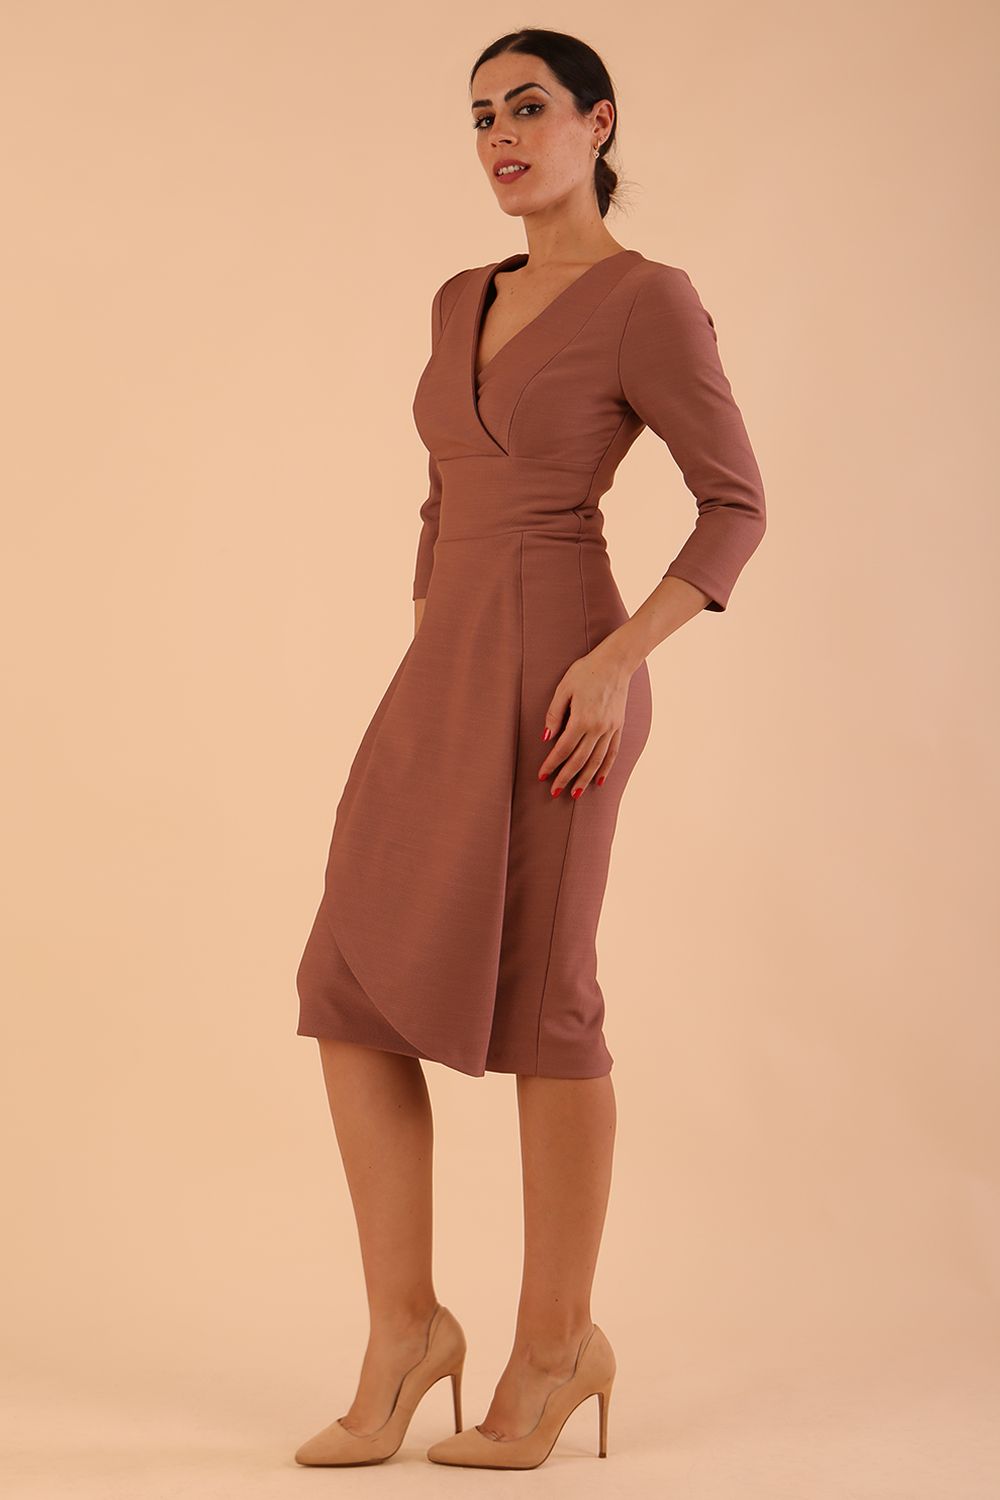 Model wearing DIVA Seed Rosemary Low V-Neckline Sleeved Pencil Dress in acorn brown colour